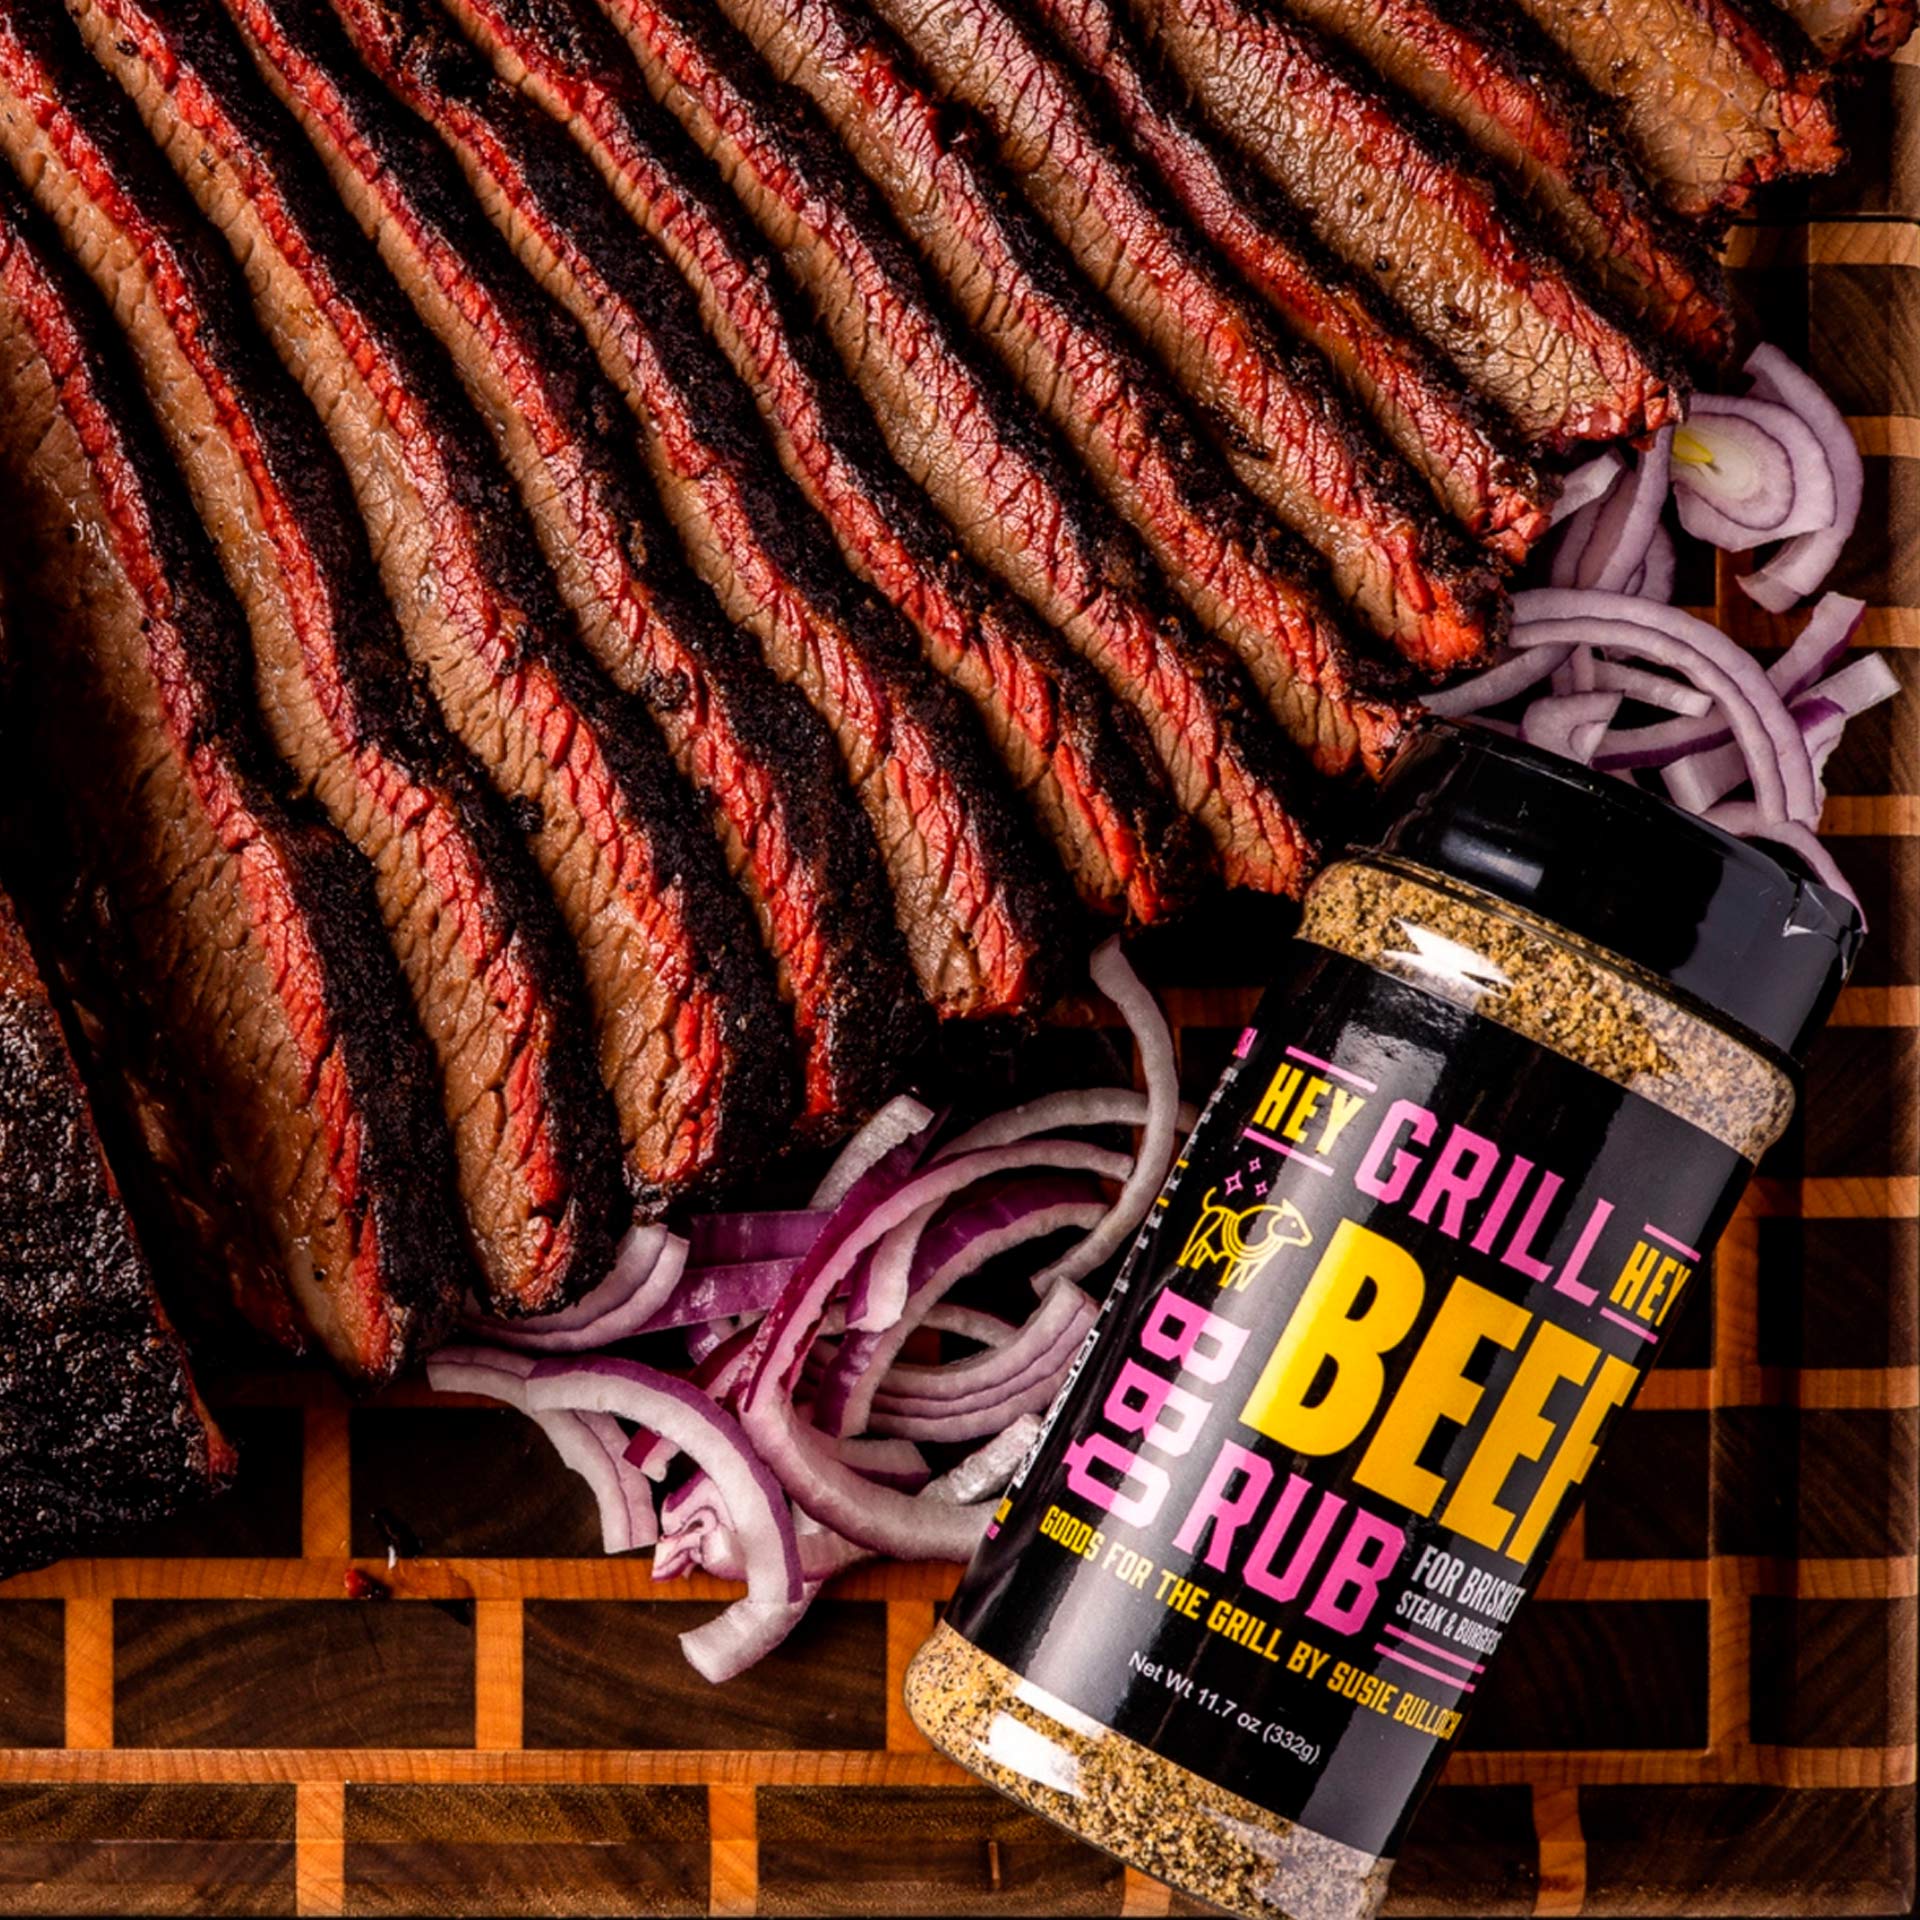 Hey Grill Hey Beef Rub Herbs & Spices 12042850